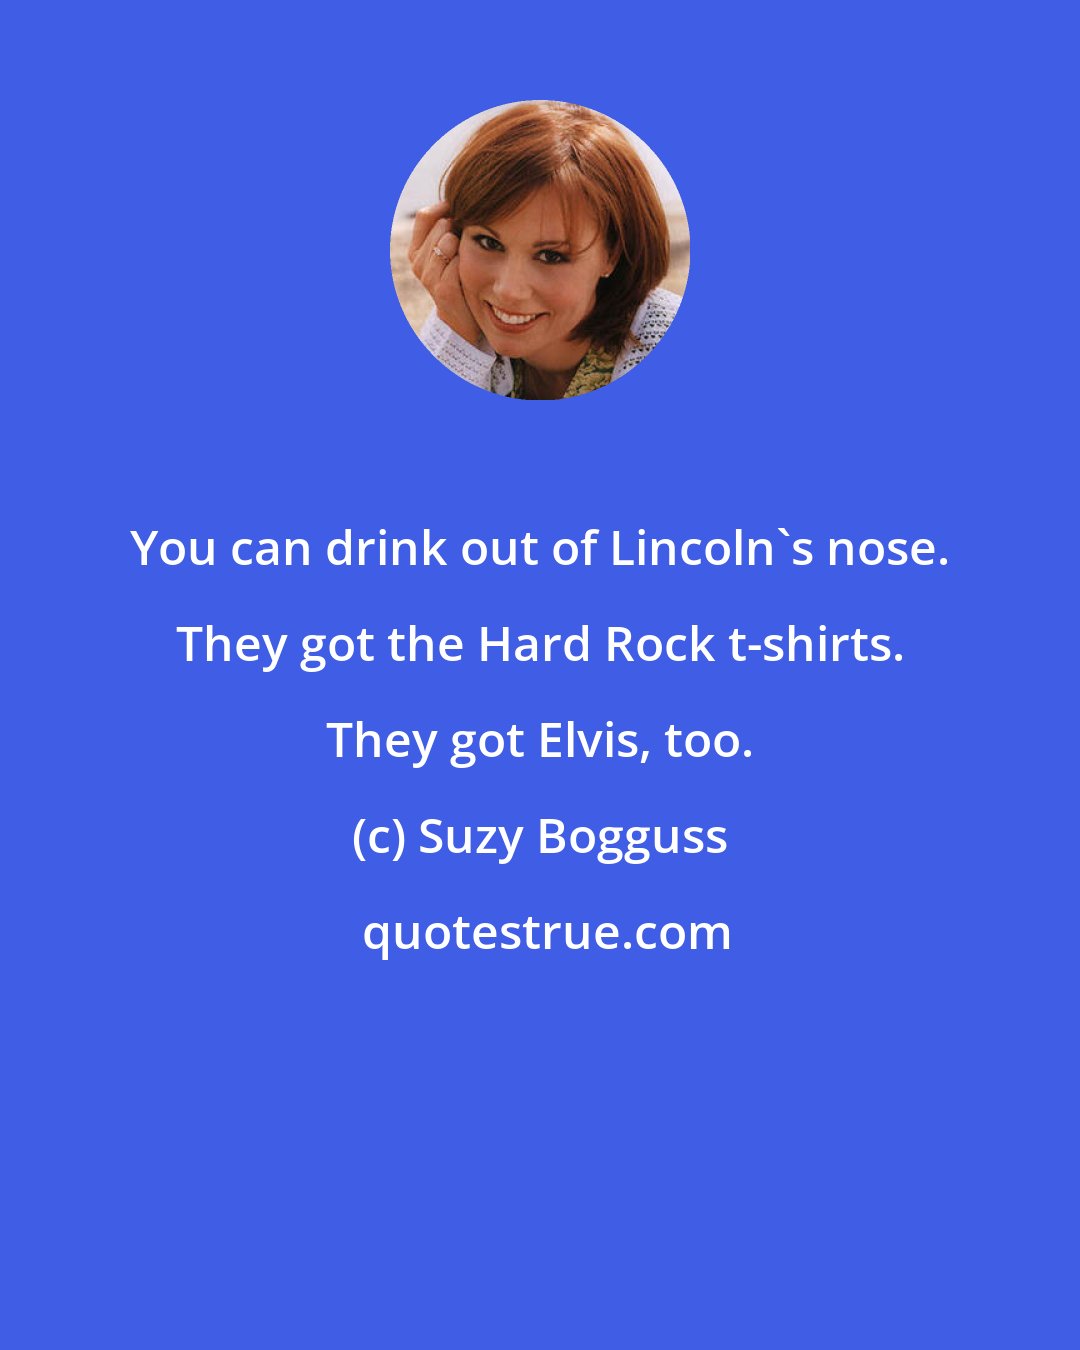 Suzy Bogguss: You can drink out of Lincoln's nose. They got the Hard Rock t-shirts. They got Elvis, too.